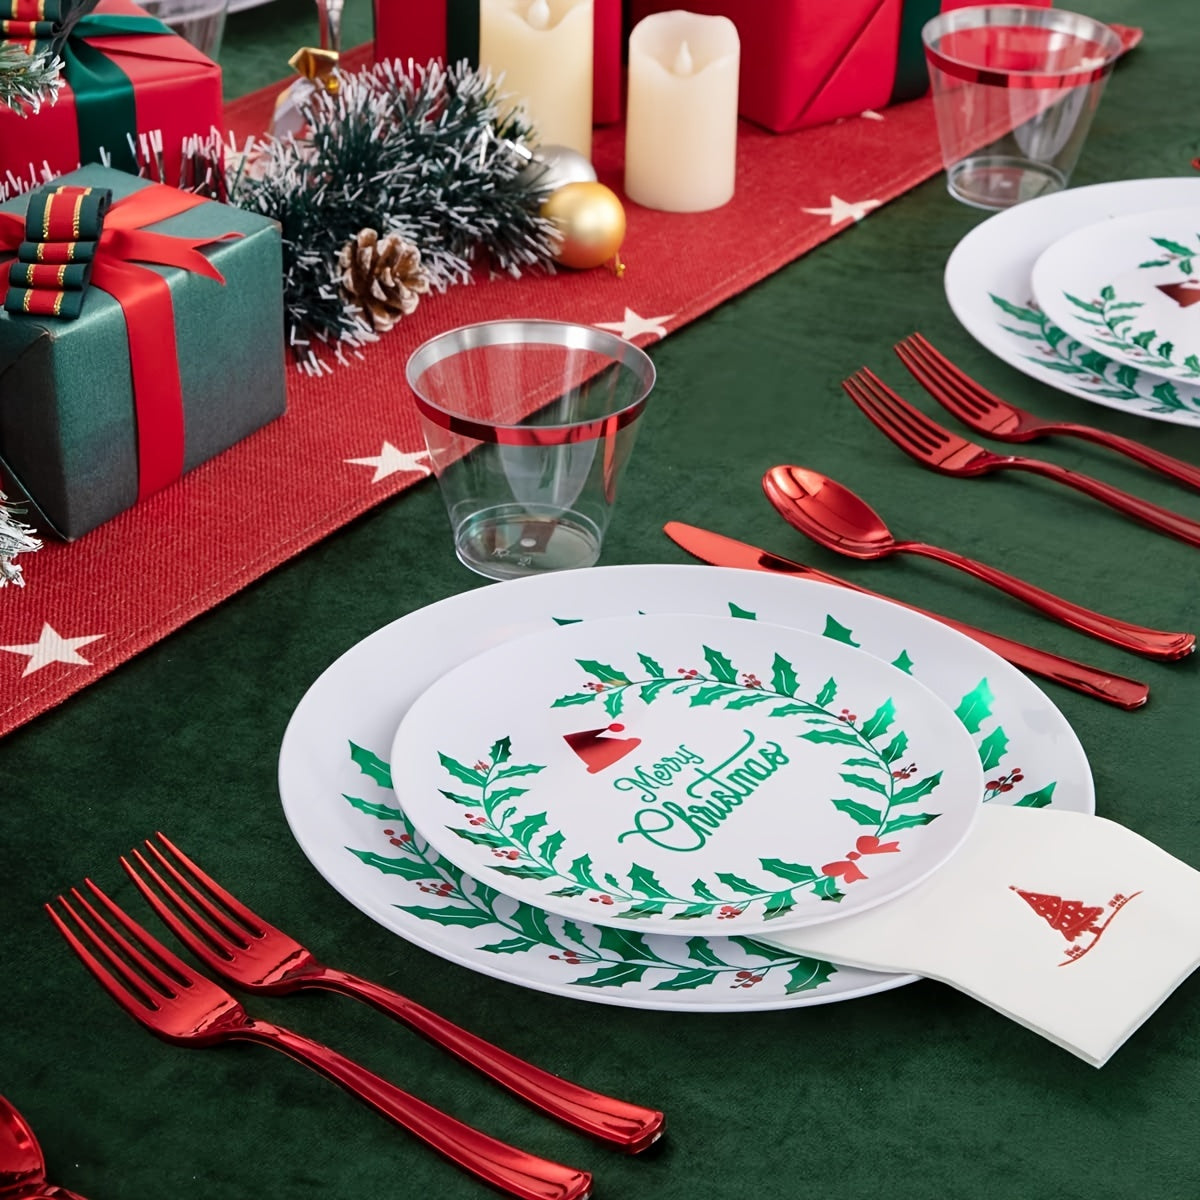 175PCS Christmas plastic plates-White and Green Plates-Christmas party Plates include 50Christmas Wreath plates, 25Guests Red Disposable Cutlery, 25Cups, 25Christmas Tree Napkins Bee's to Find